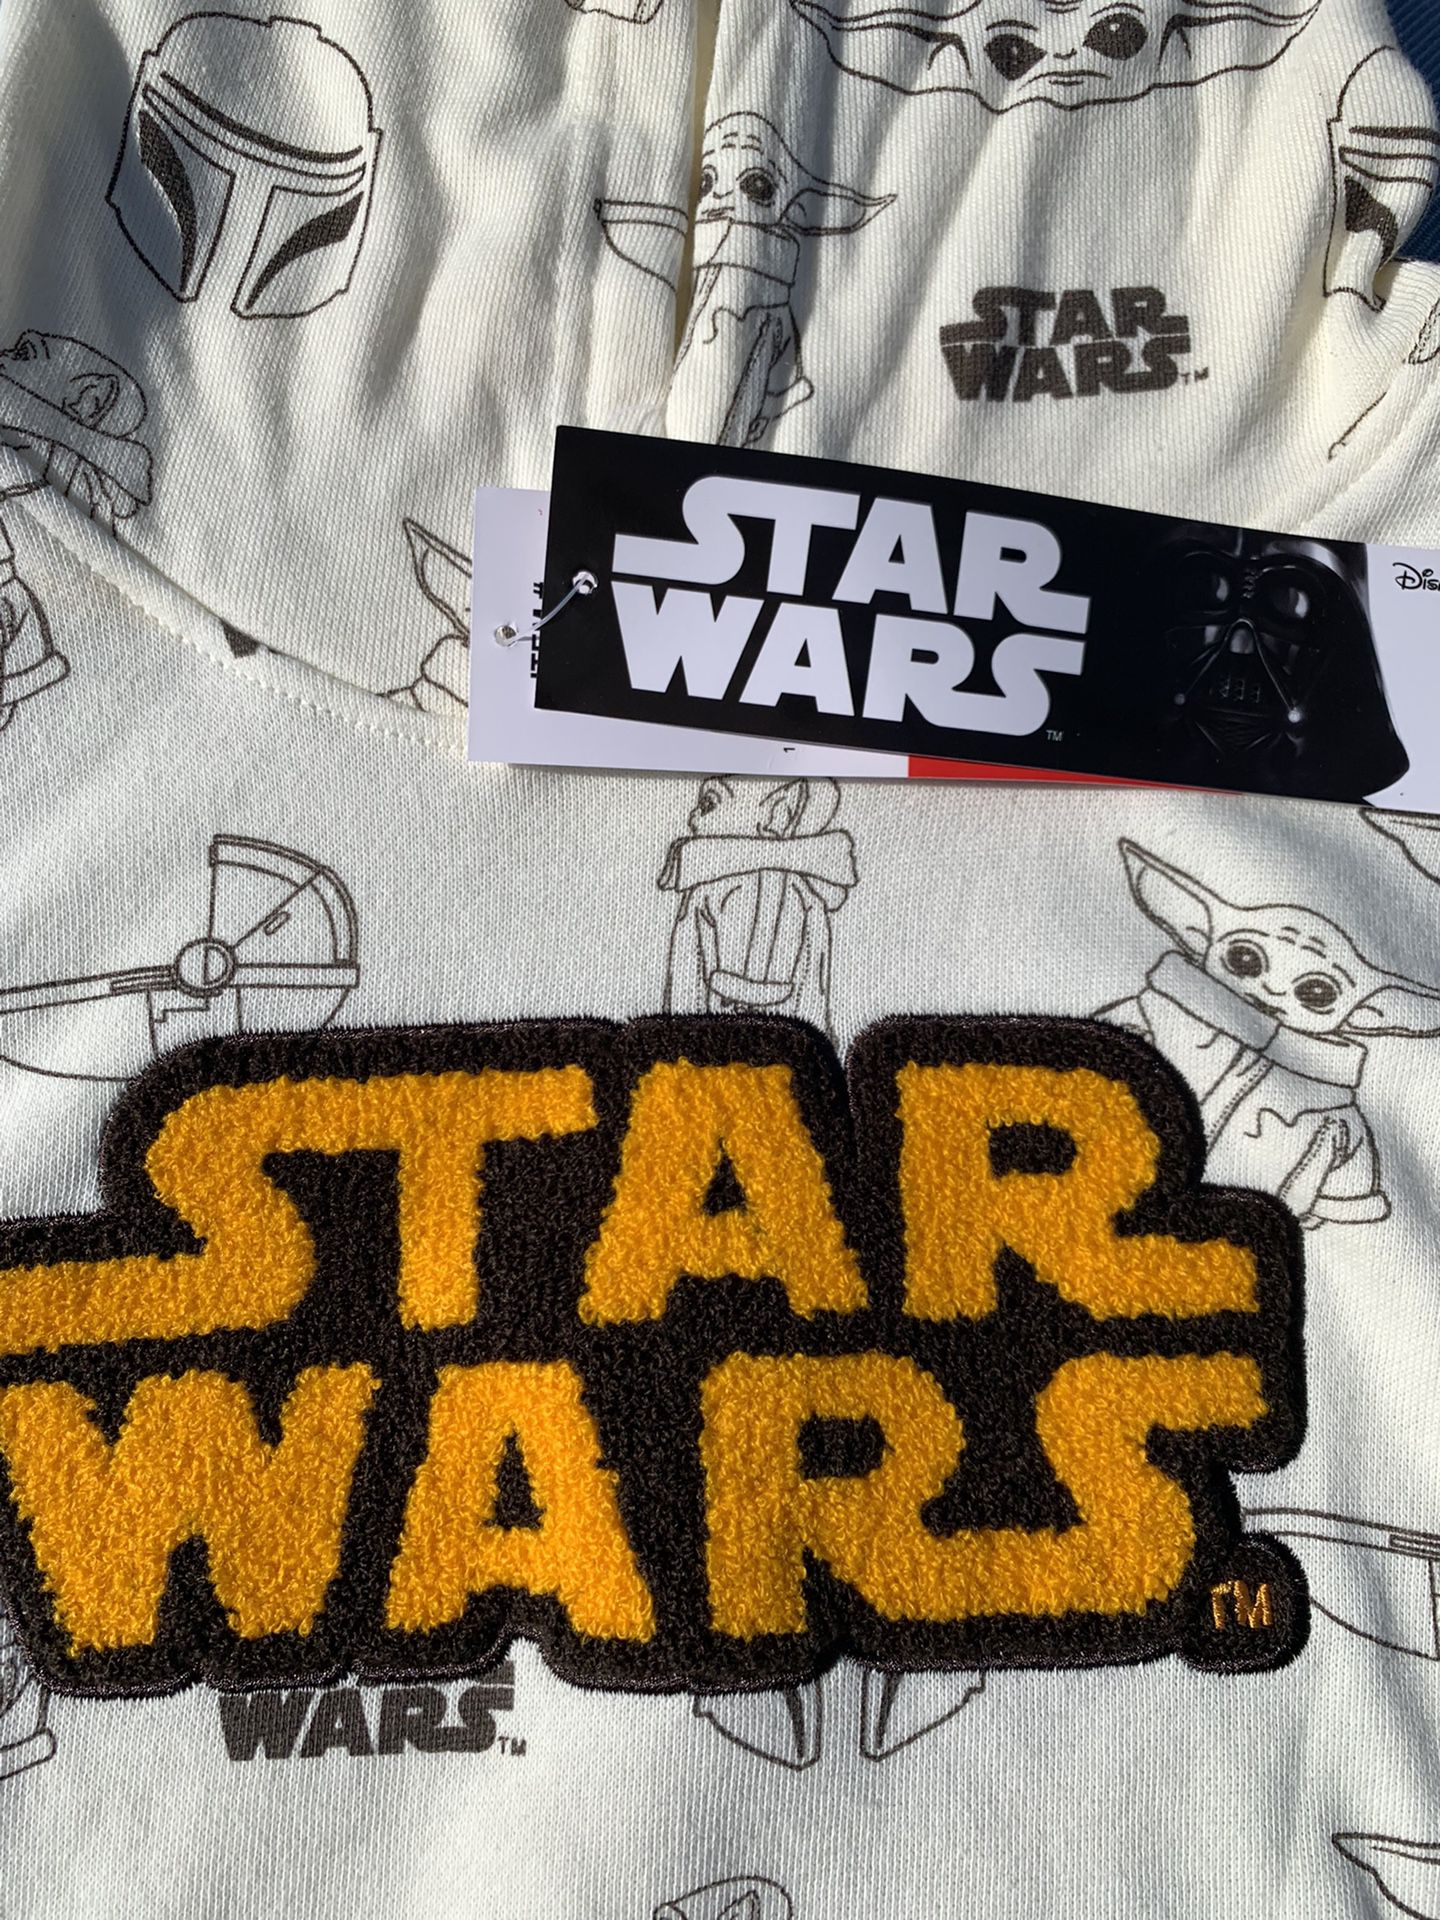 STAR WARS HOODIE FOR BOYS M (10/12) NEW